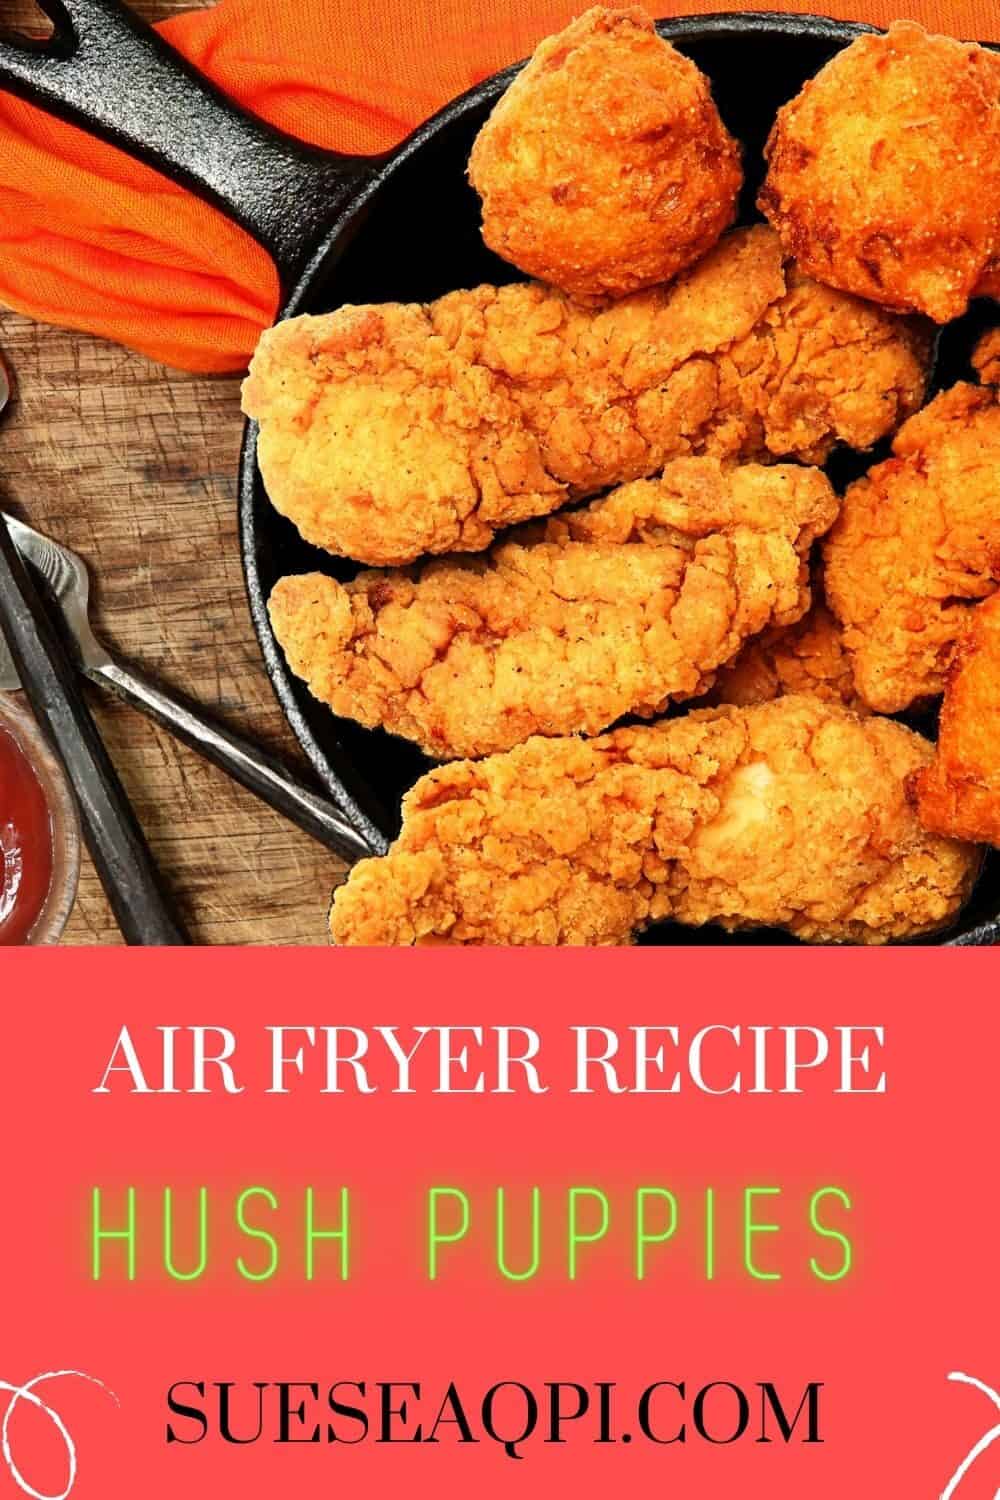 Air fryer hush puppies and  fried chicken in a cast iron skillet on a wooden table with an orange napkin